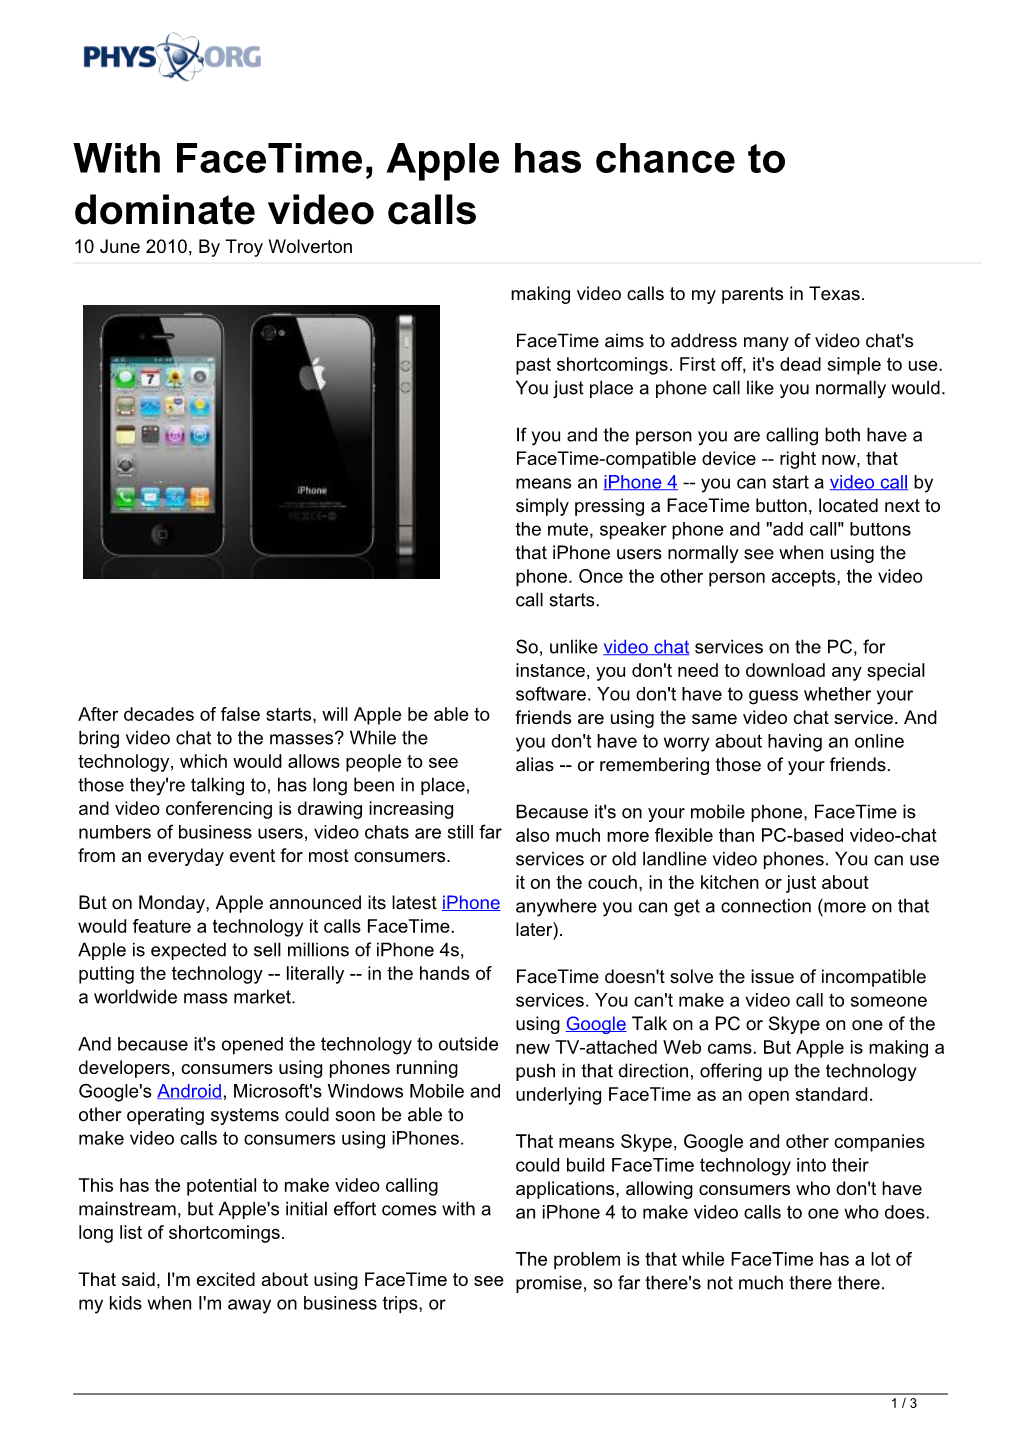 With Facetime, Apple Has Chance to Dominate Video Calls 10 June 2010, by Troy Wolverton